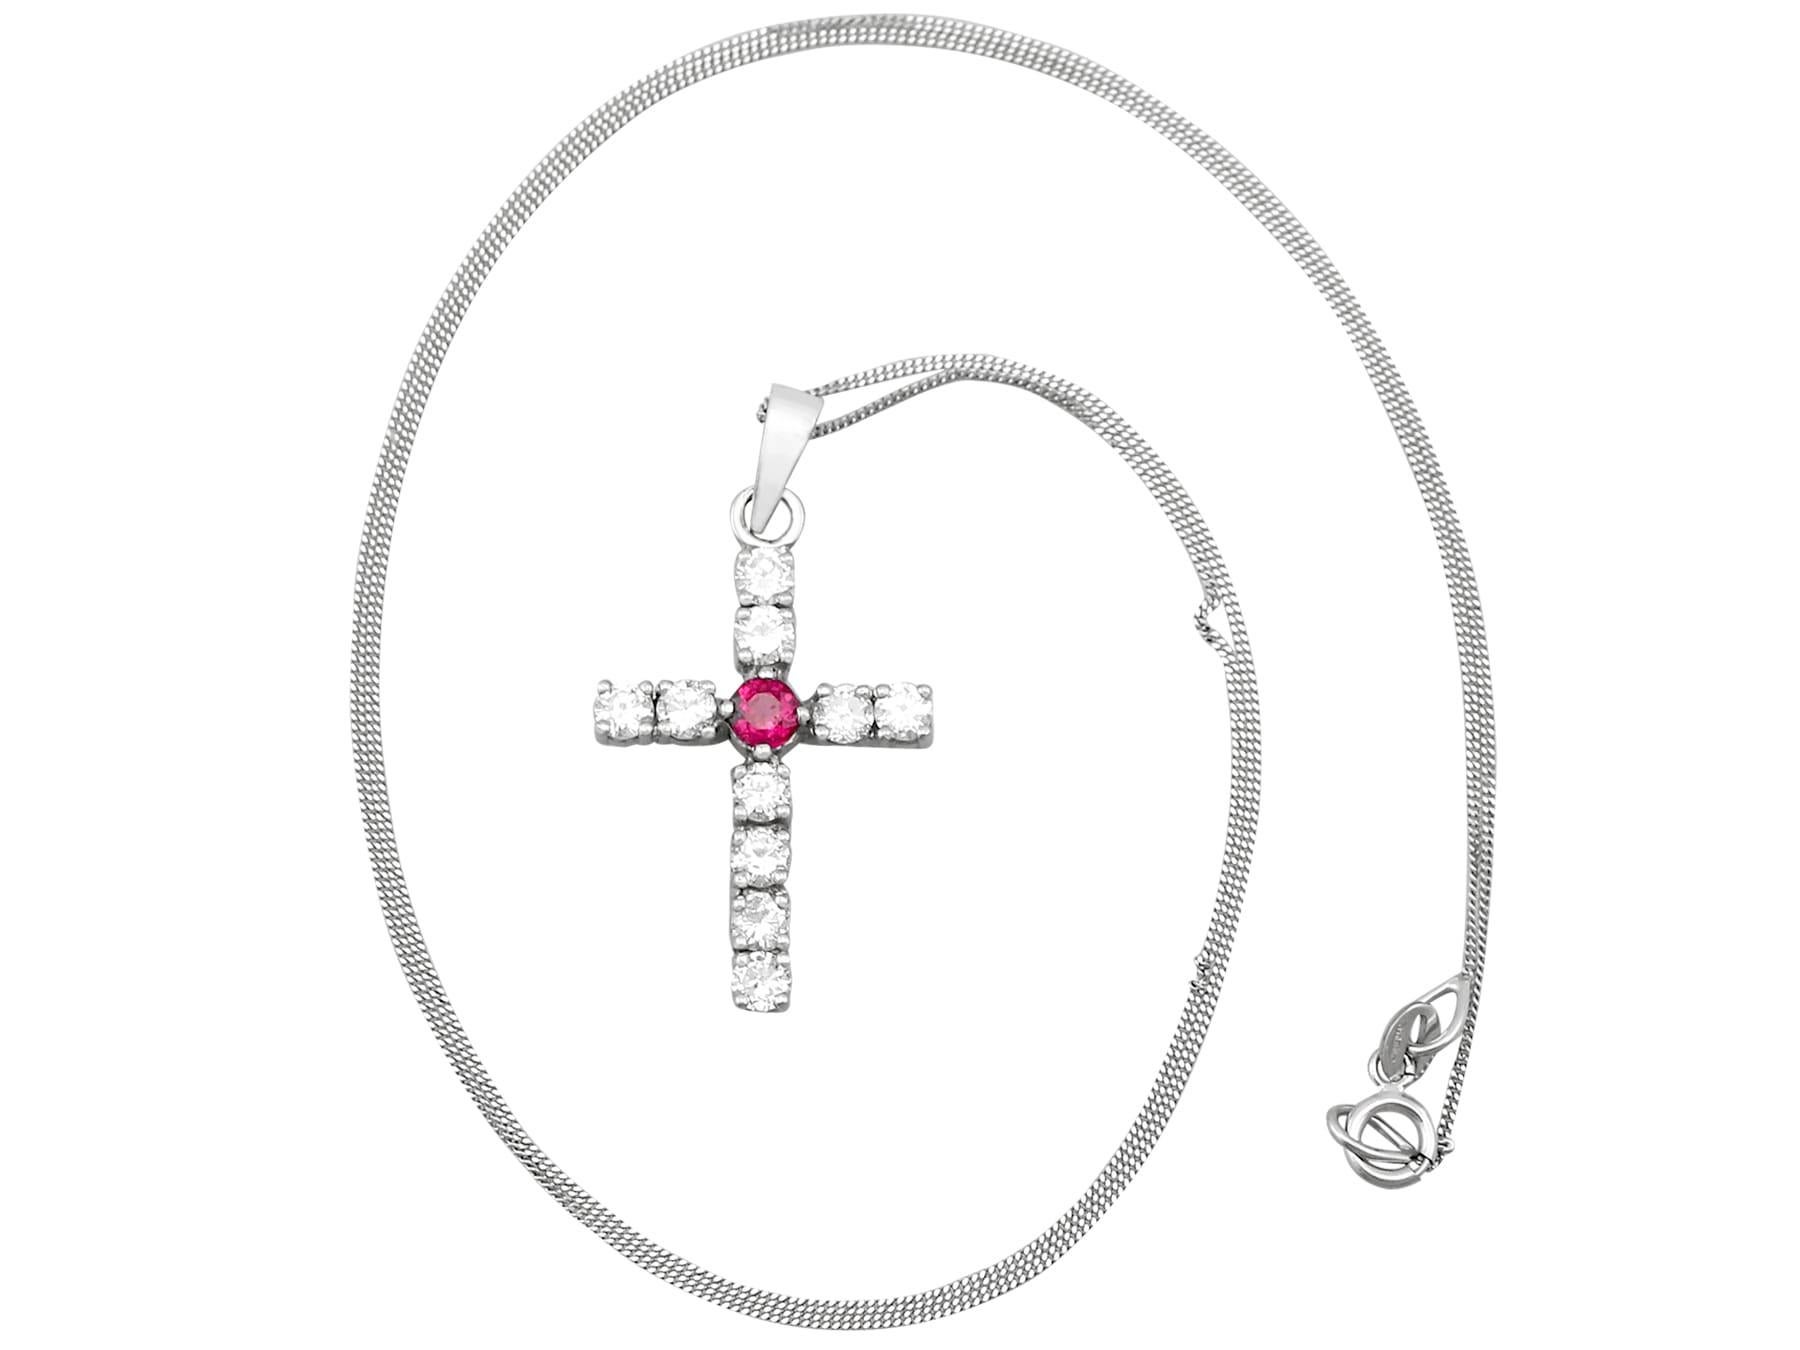 An impressive vintage 0.15 carat ruby and 0.85 carat diamond, 18 karat white gold 'cross' pendant; part of our diverse ruby jewelry and estate jewelry collections.

This fine and impressive vintage pendant has been crafted in 18k white gold.

The